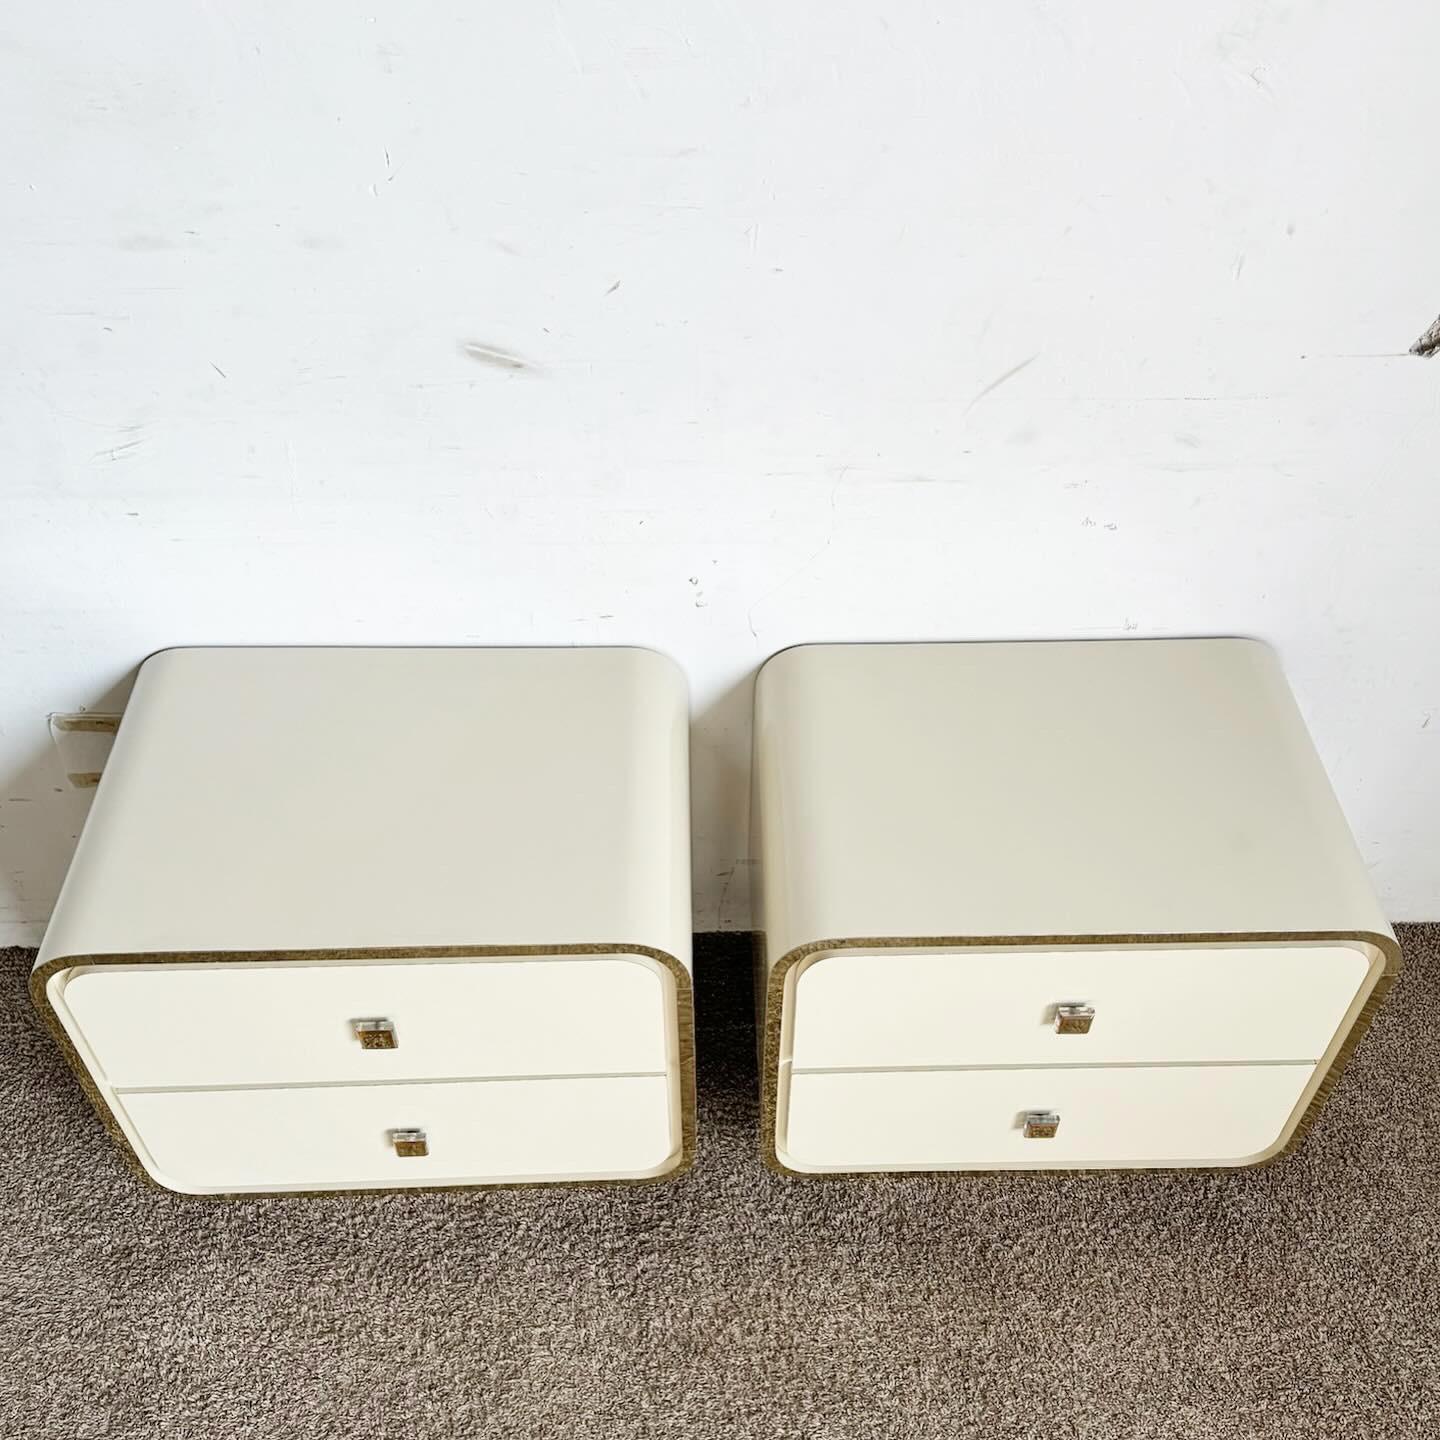 Elevate your bedroom with the Postmodern Cream Lacquer Laminate Waterfall Nightstands with Gold Trim. These nightstands boast a sculpted waterfall design in a cream lacquer finish, accented with elegant gold trim. Offering practical storage with